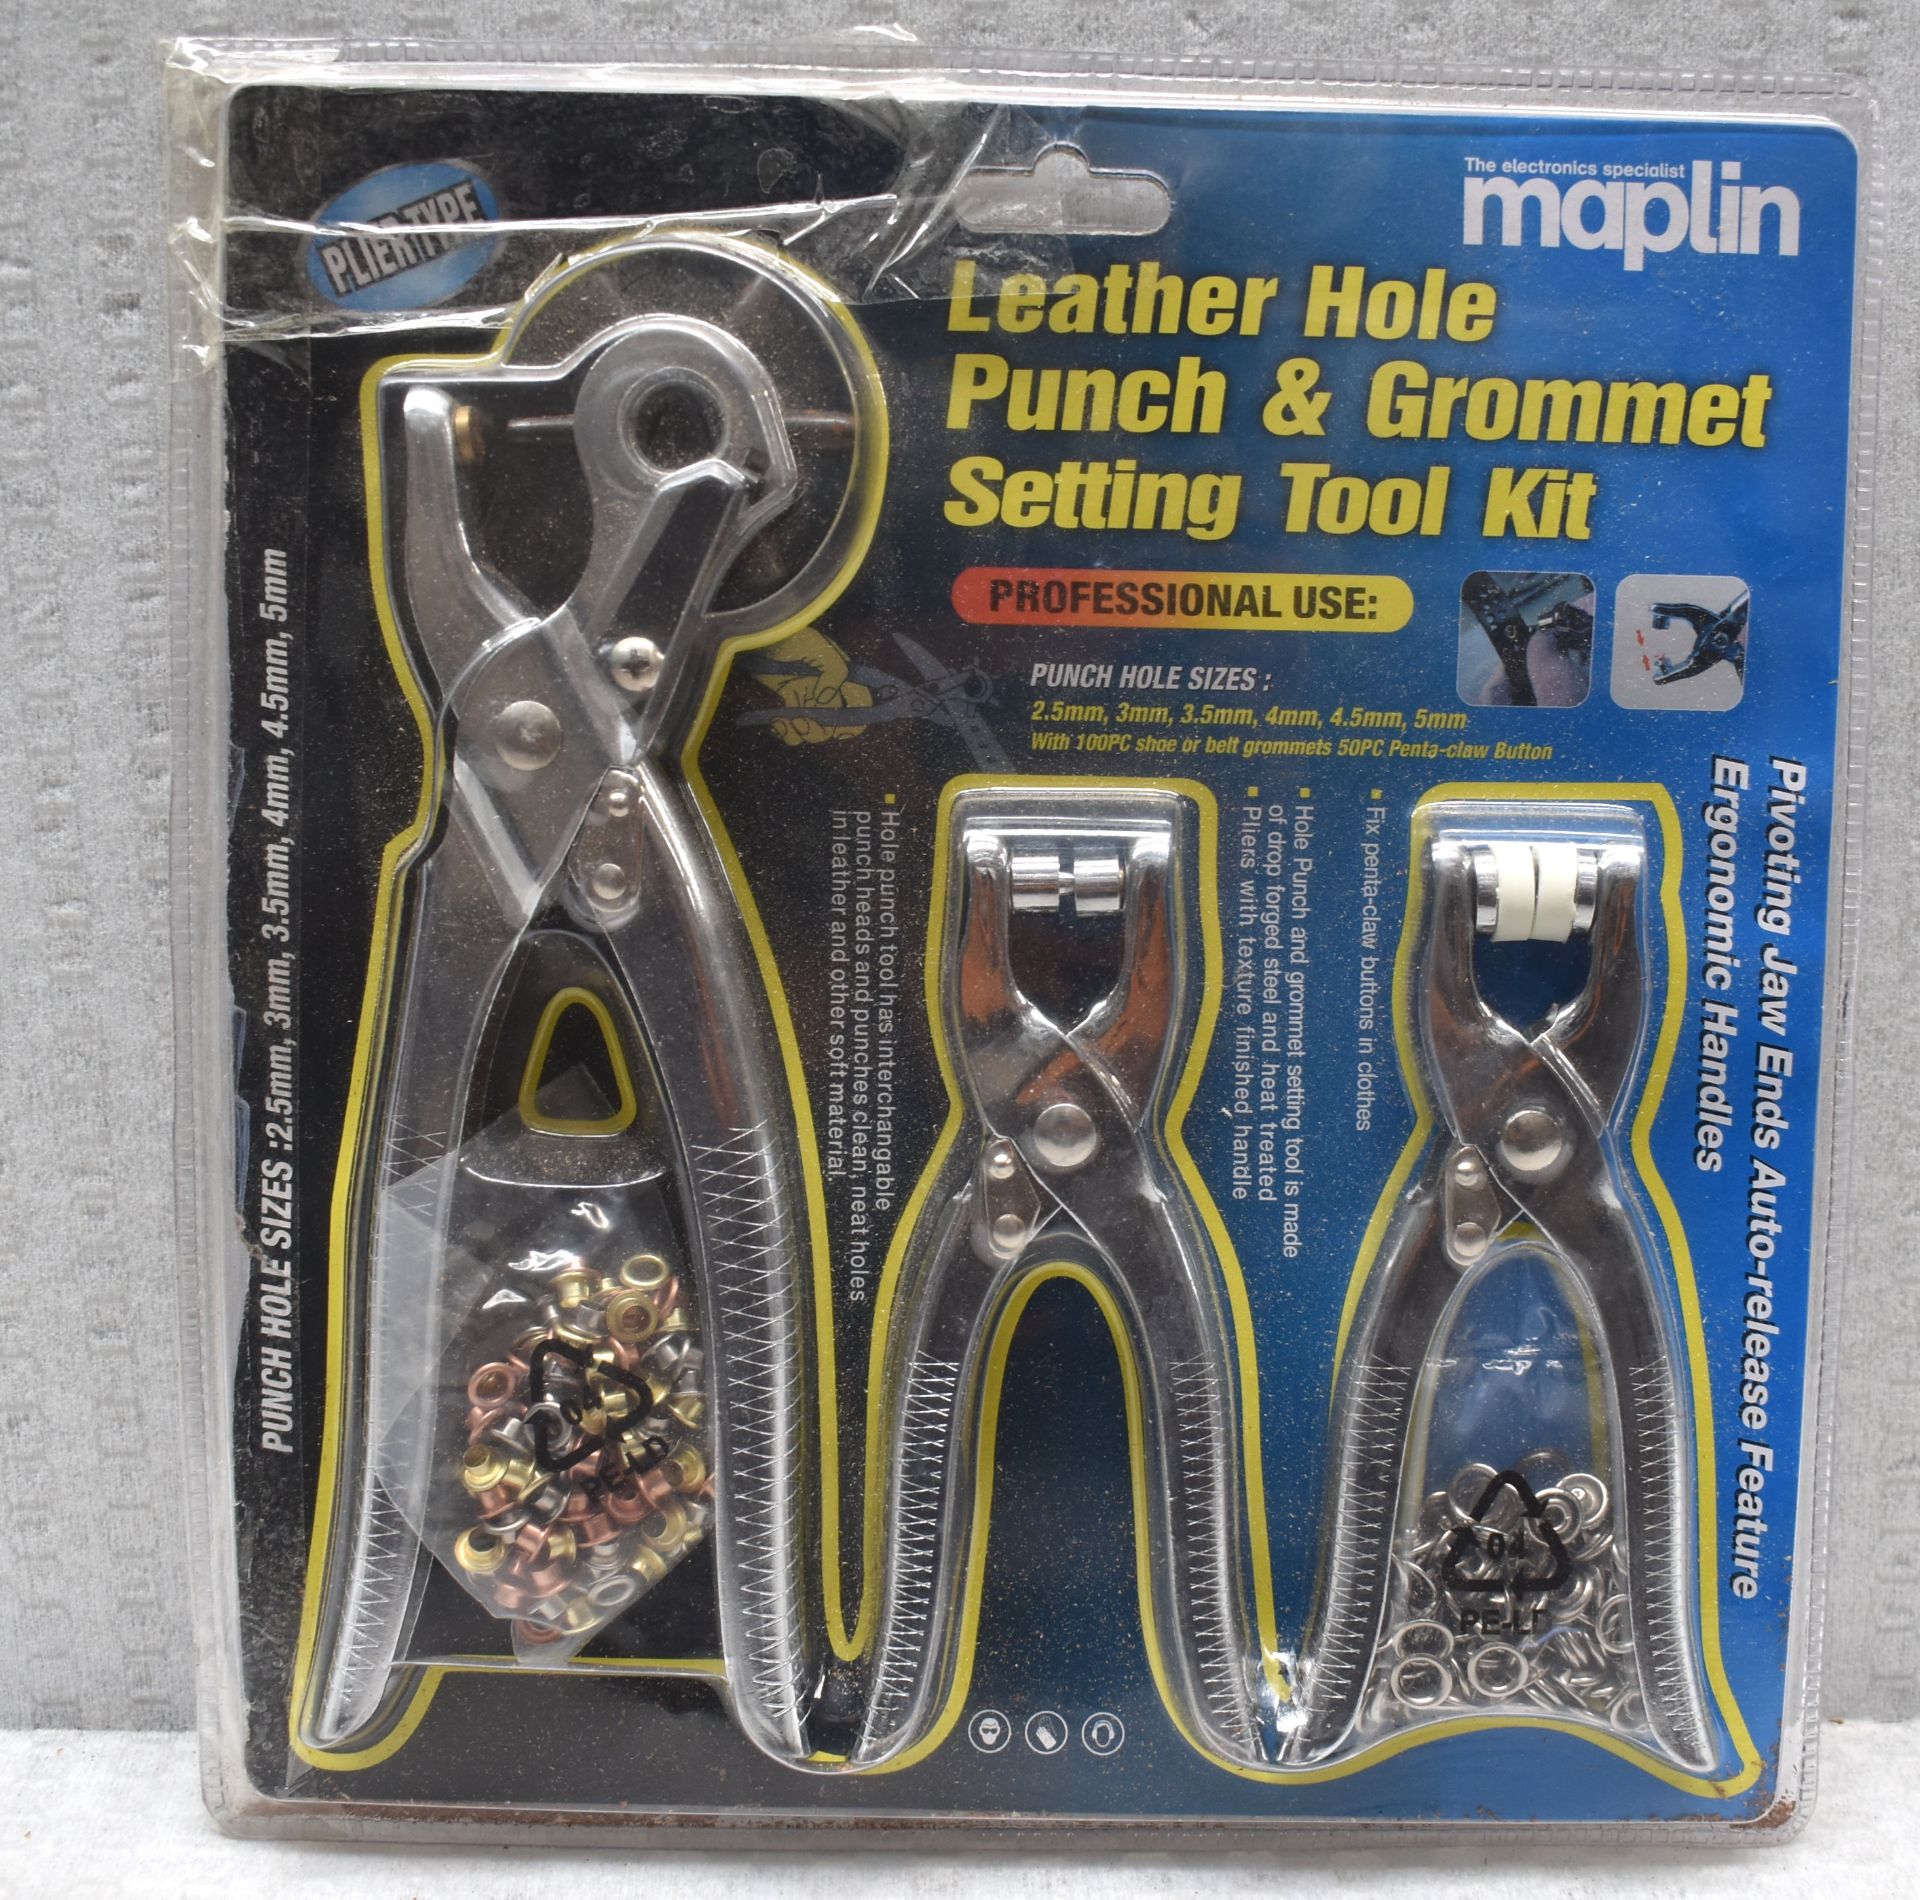 1 x MAPLIN Leather Hole Punch & Grommet Setting Tool Kit - Ref: K250 - CL905 - Location: Altrincham